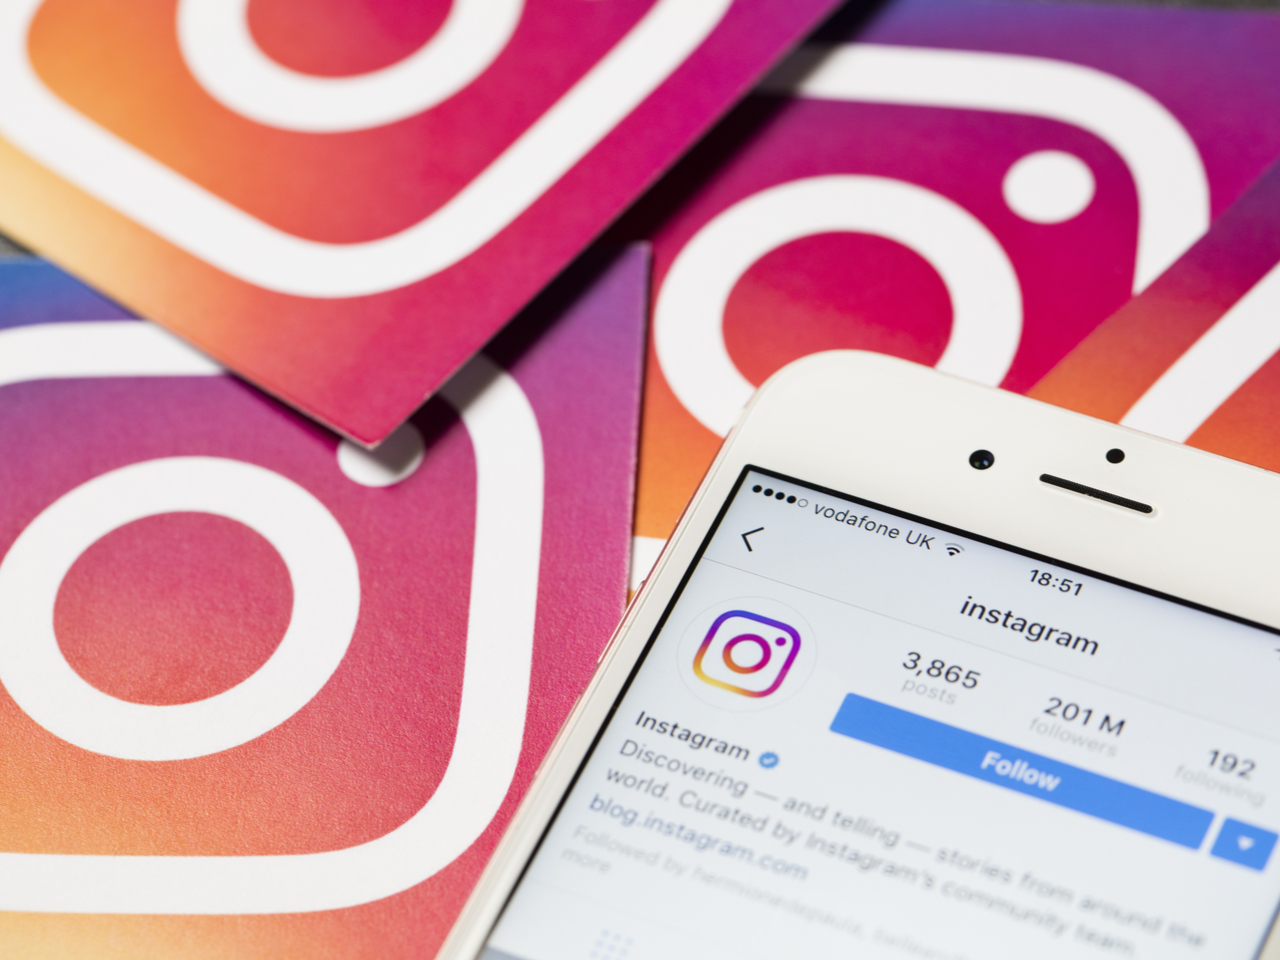 Learning Instagram: Advice on Increasing Your Likes and Views